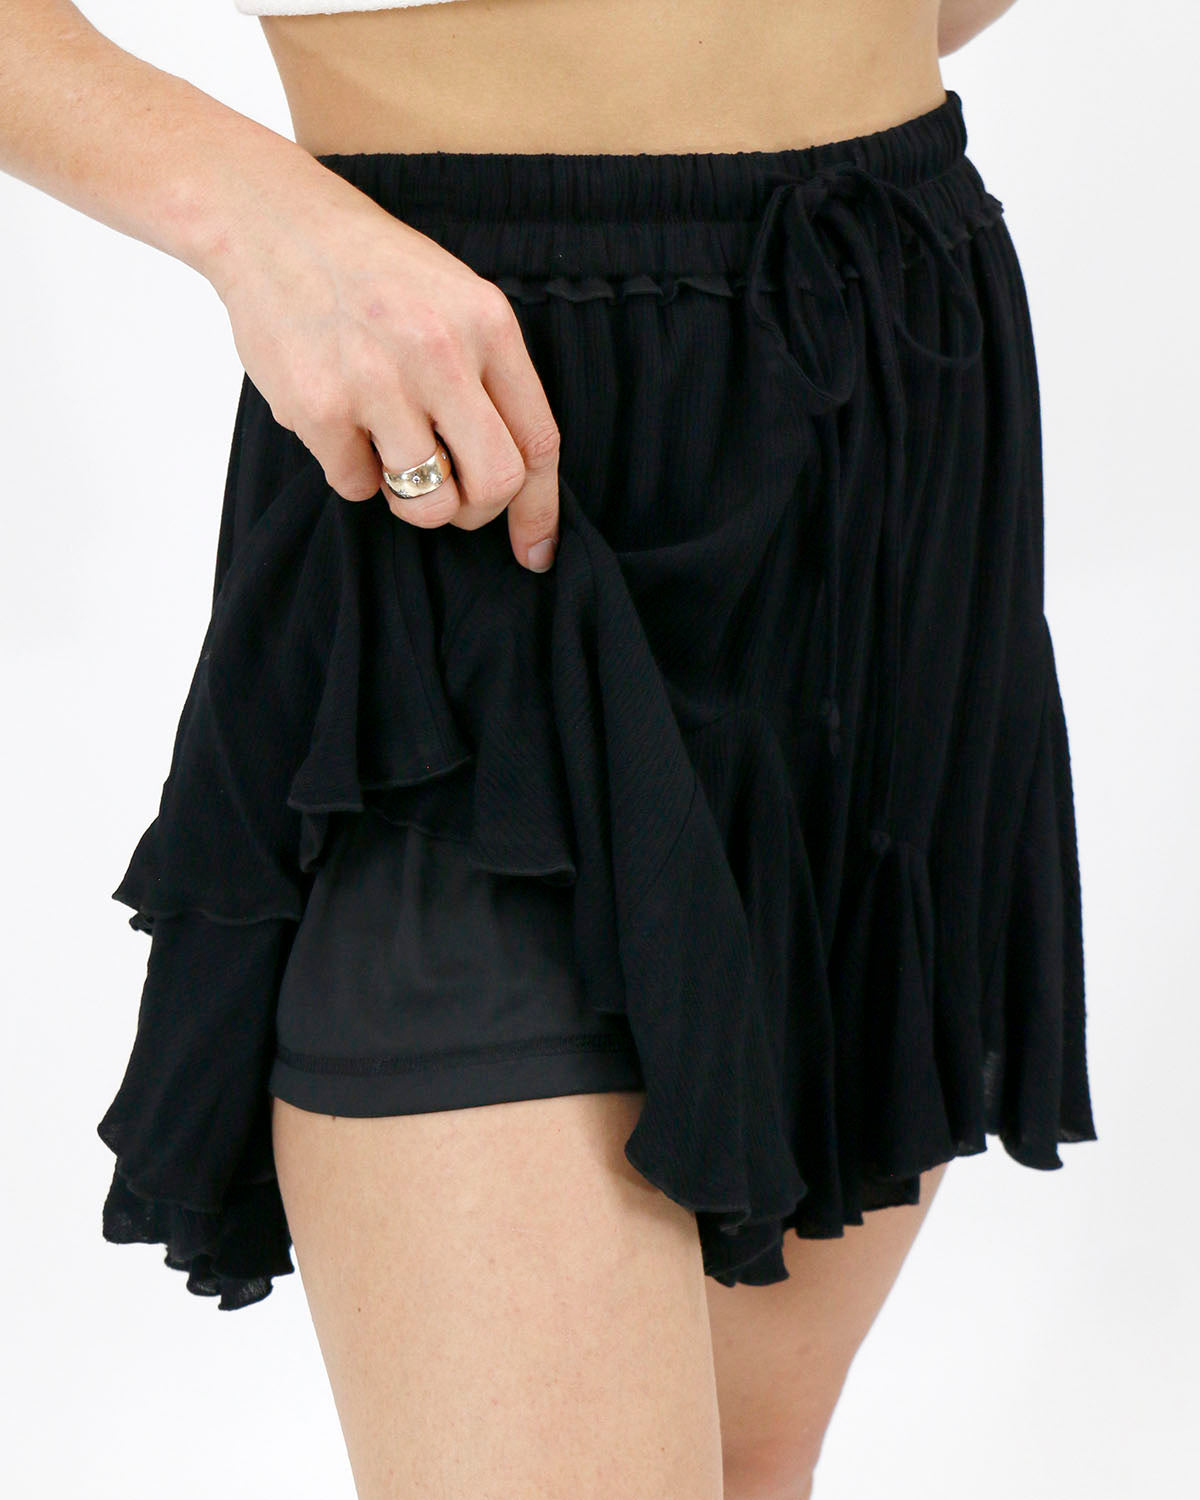 view of attached shorts underneath black flutter skirt 